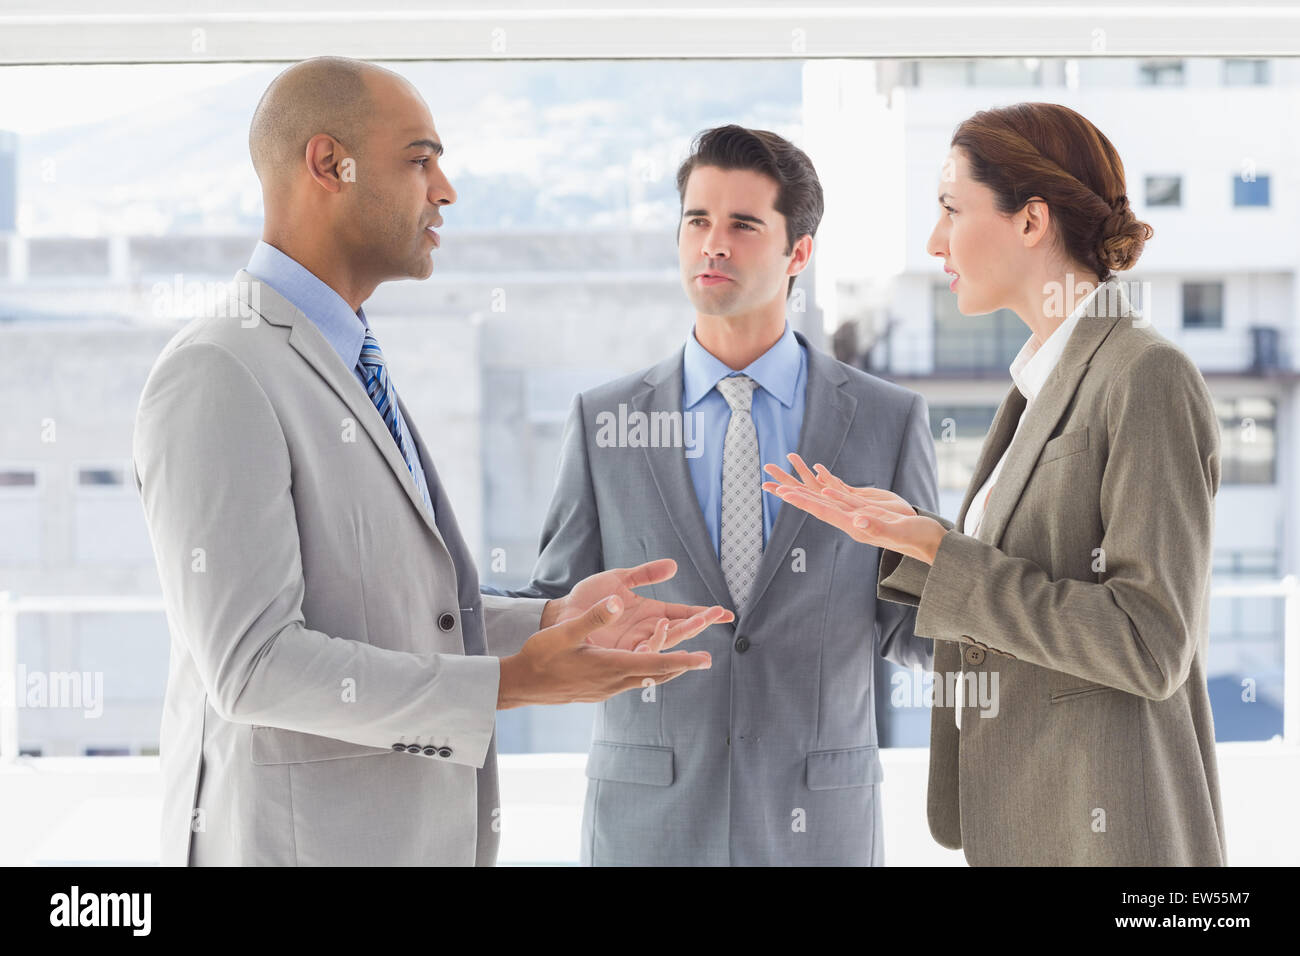 Business colleagues having a disagreement Stock Photo